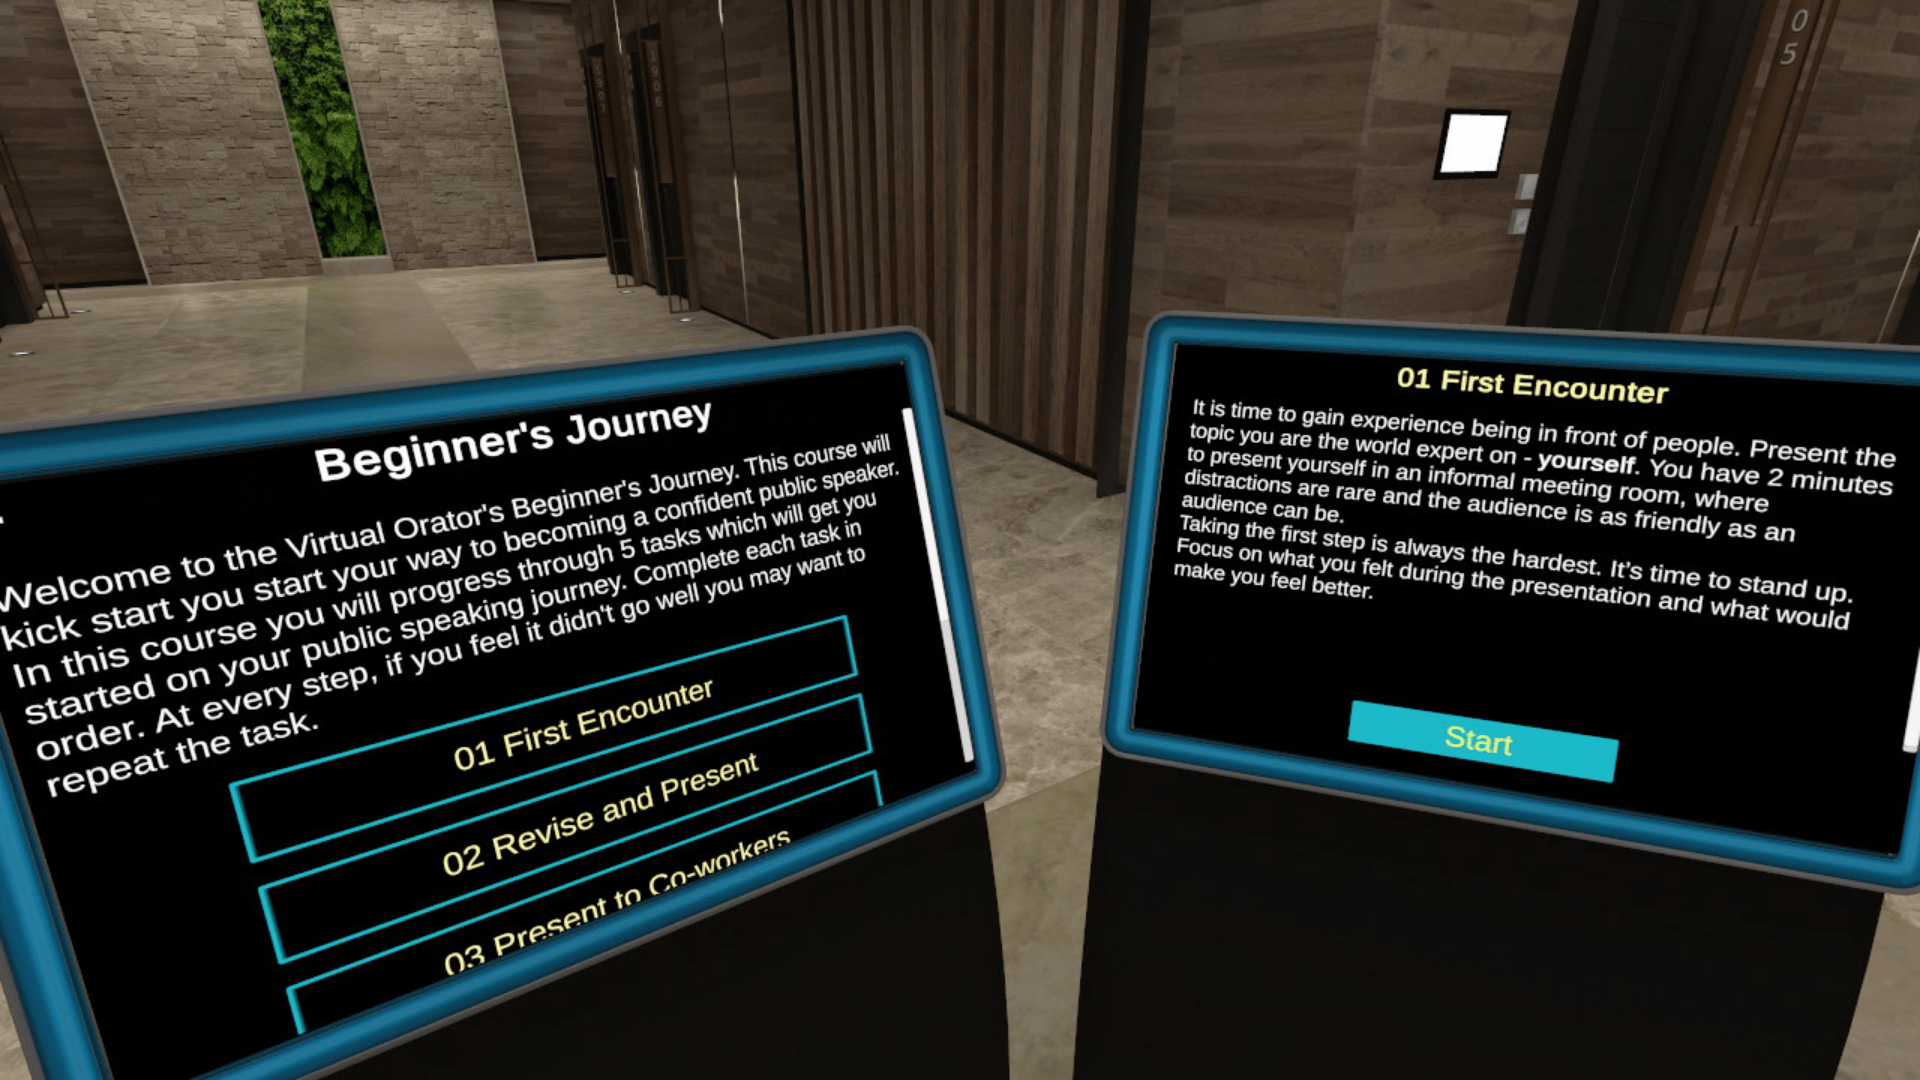 Public Speaking Courses in VR: Take your Virtual Orator experience to the next level